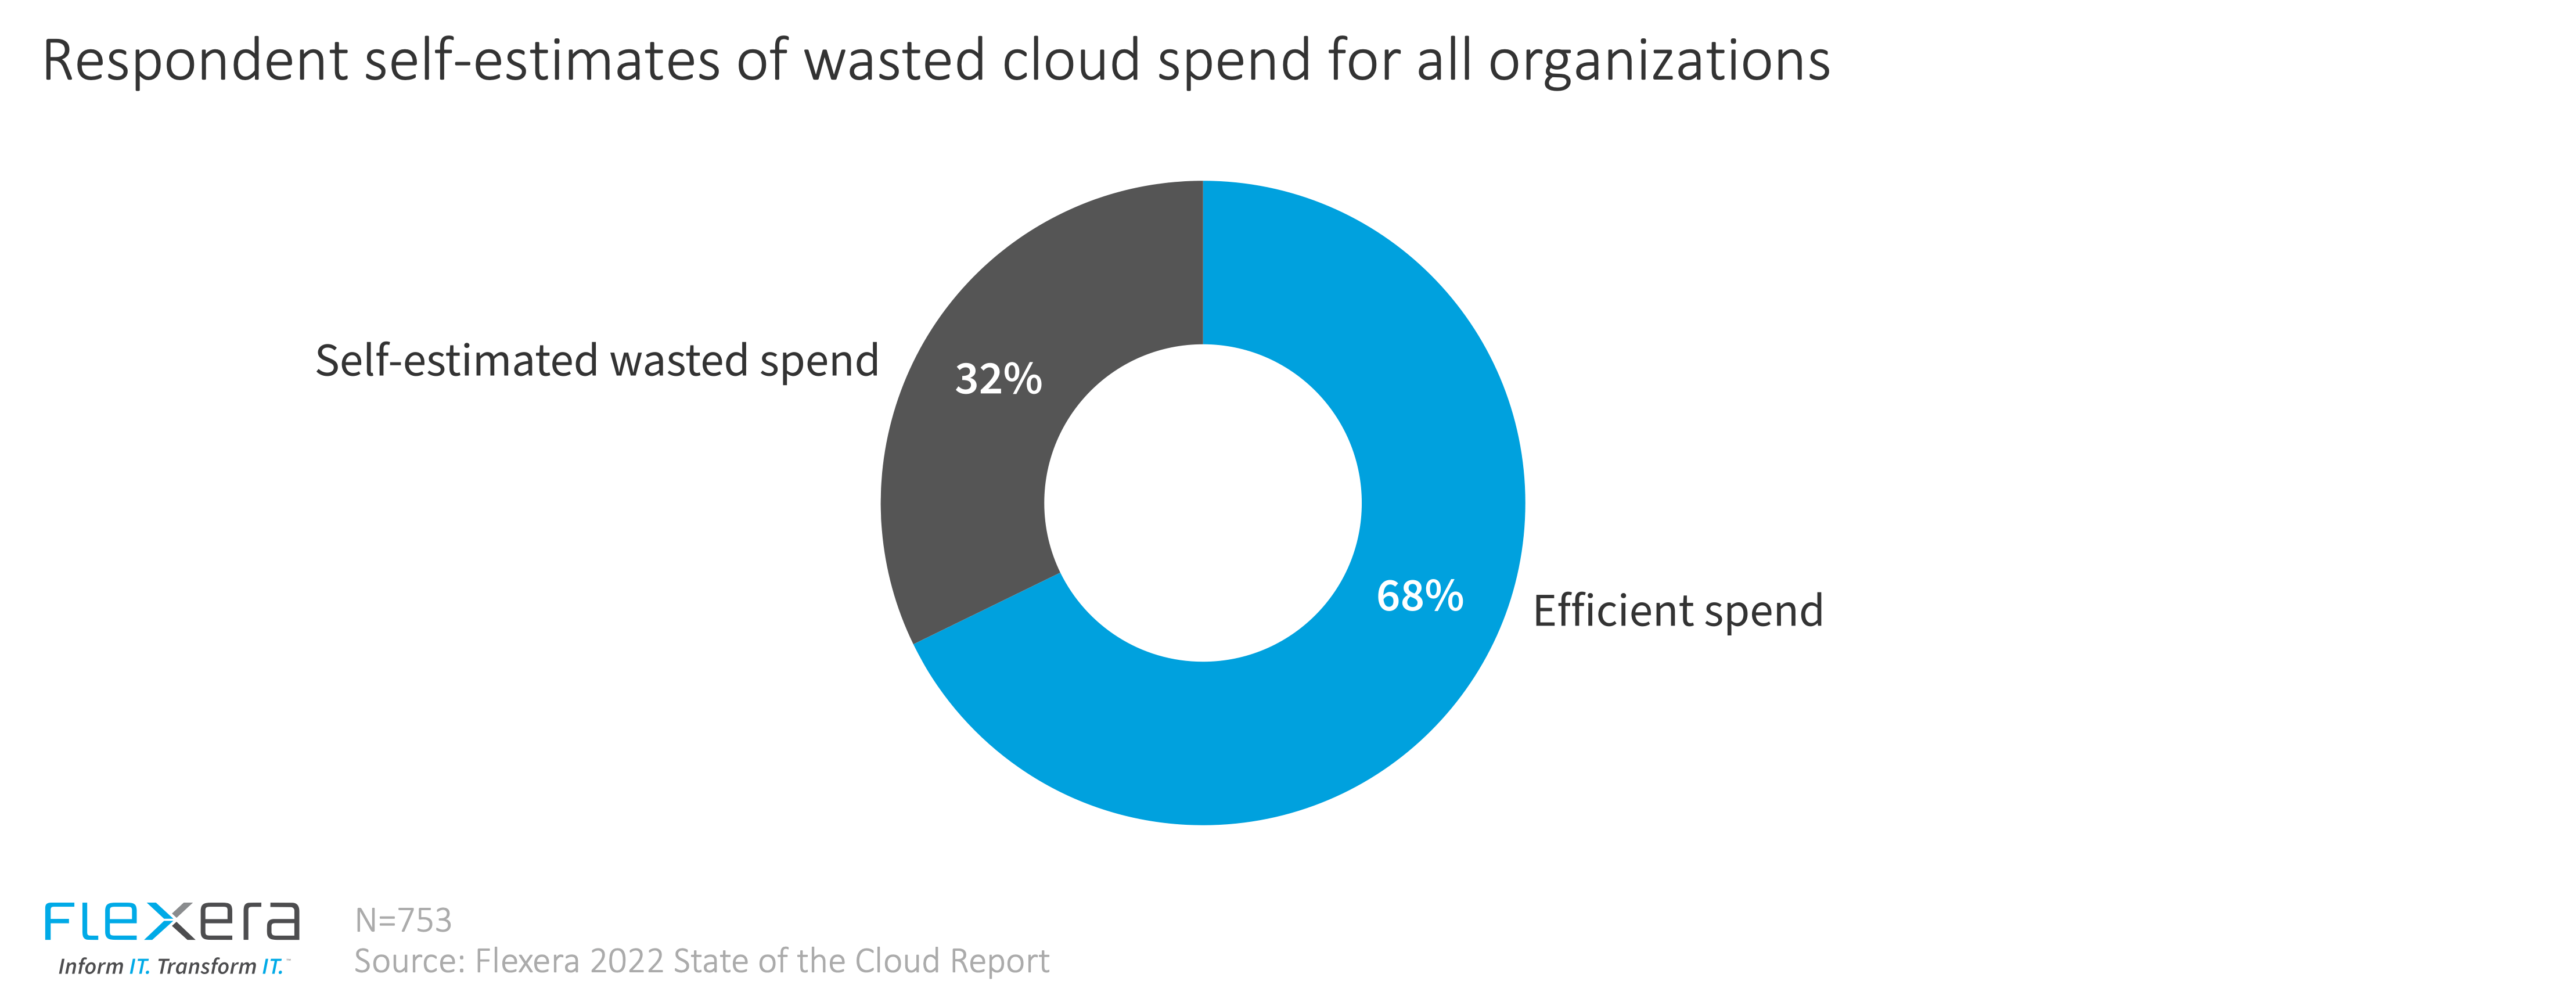 Wasted cloud spend for all organizations